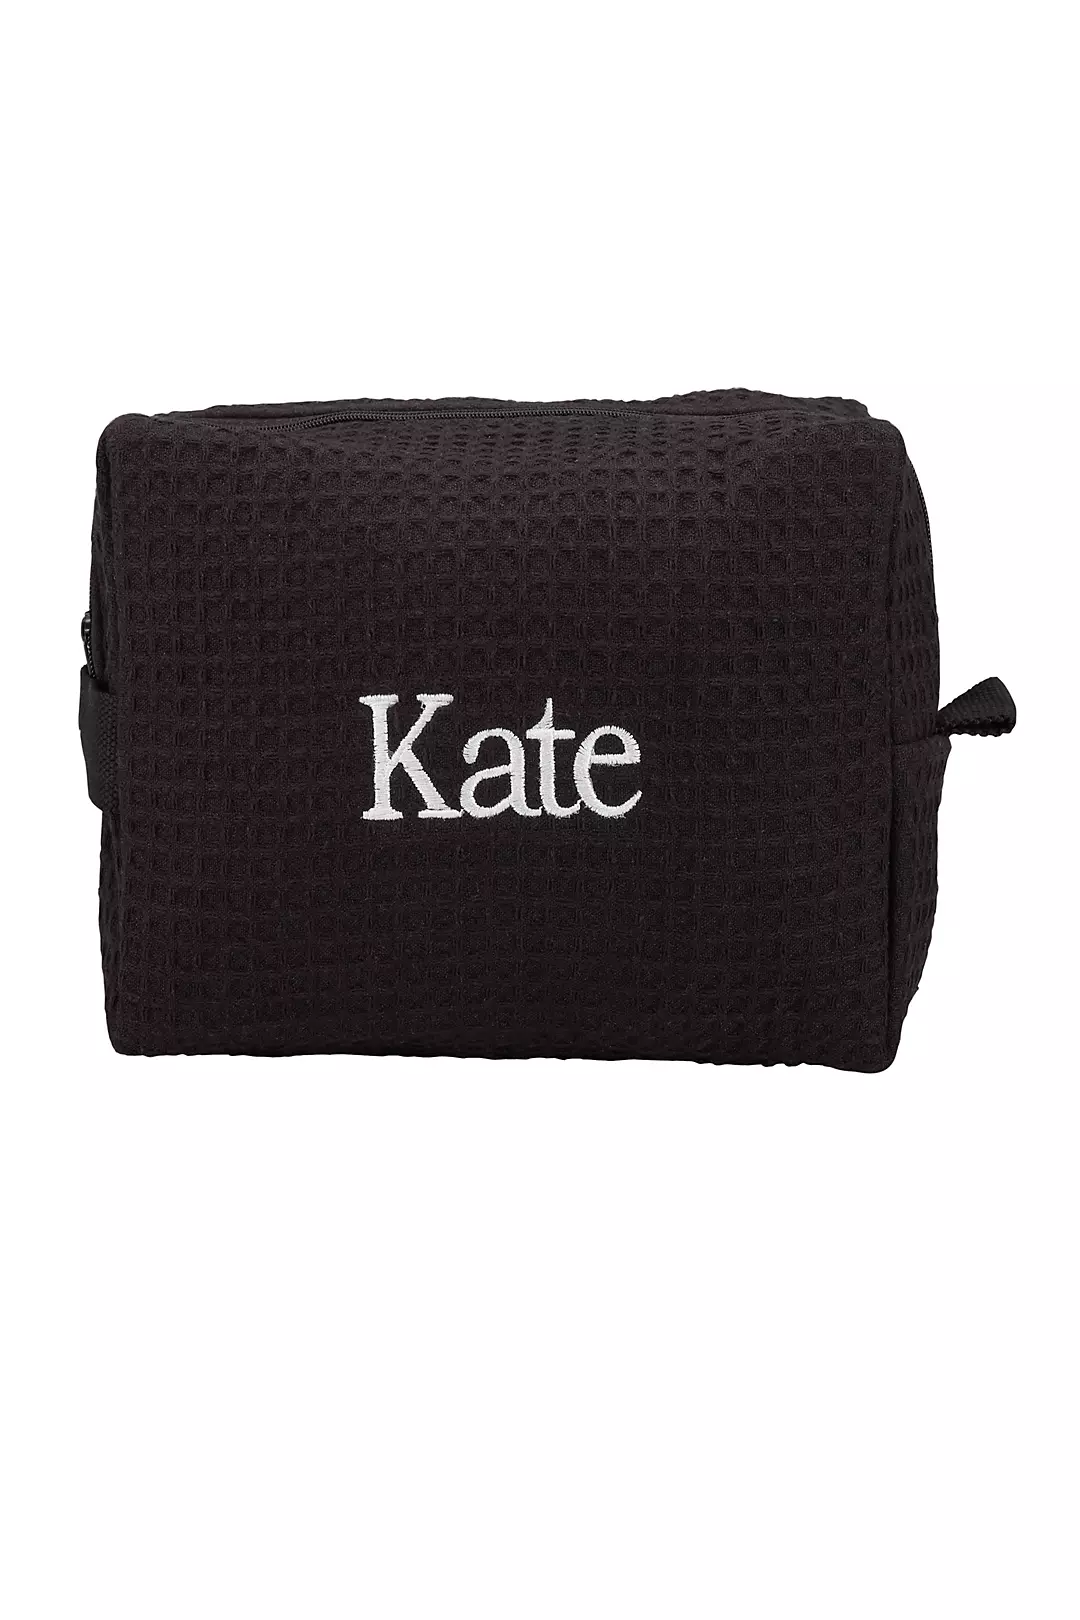 Personalized Waffle Weave Cosmetic Bag Image